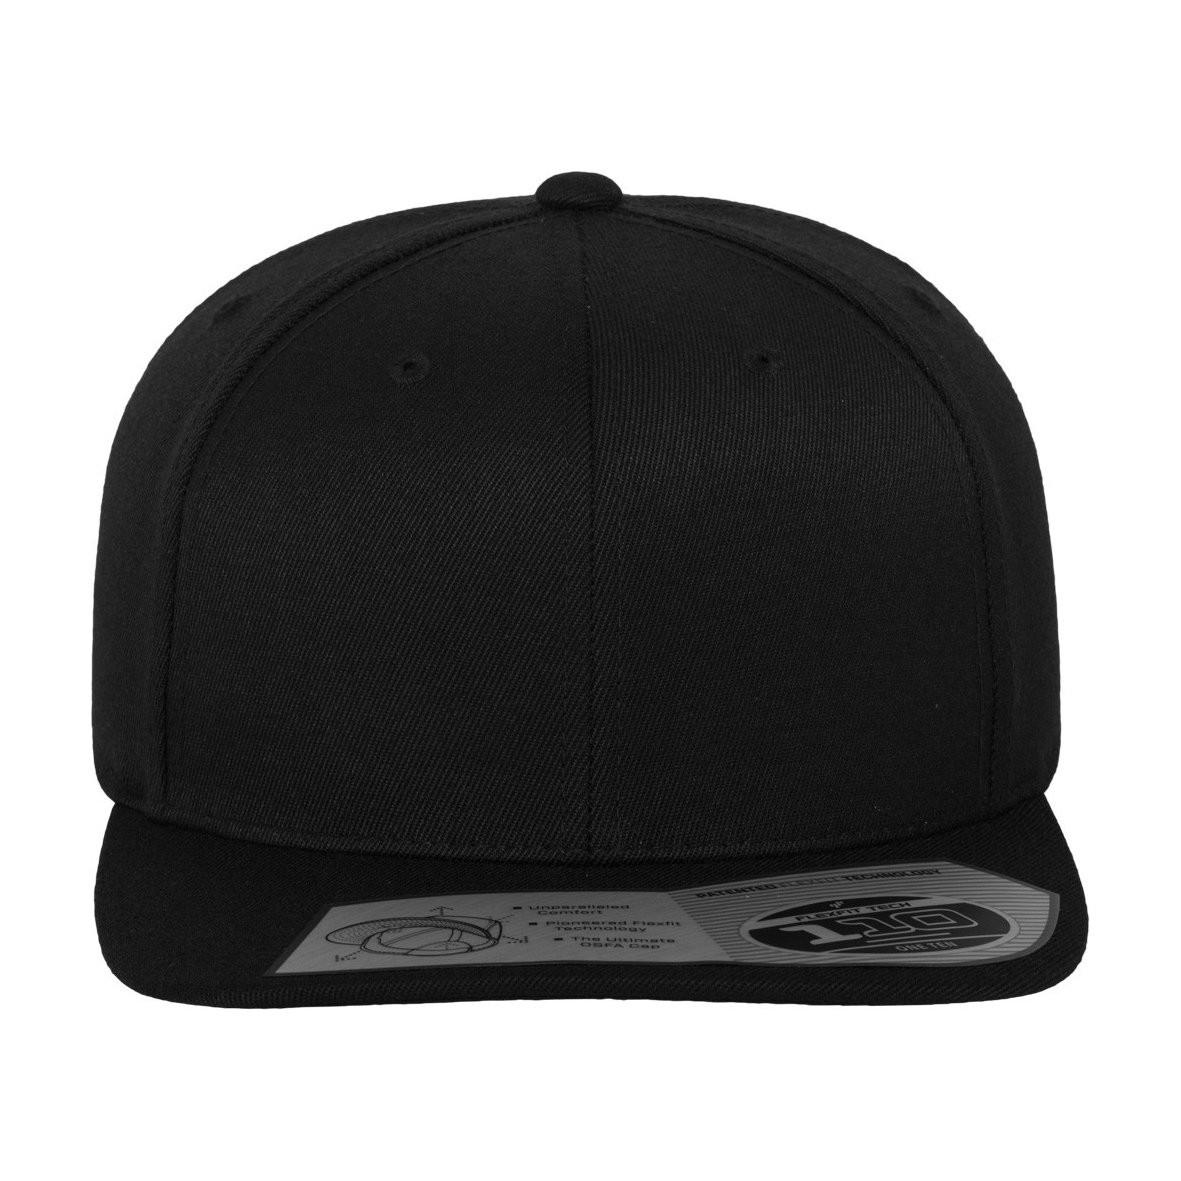 Buy Flexfit 110 Fitted Snapback Cap - black - One Size